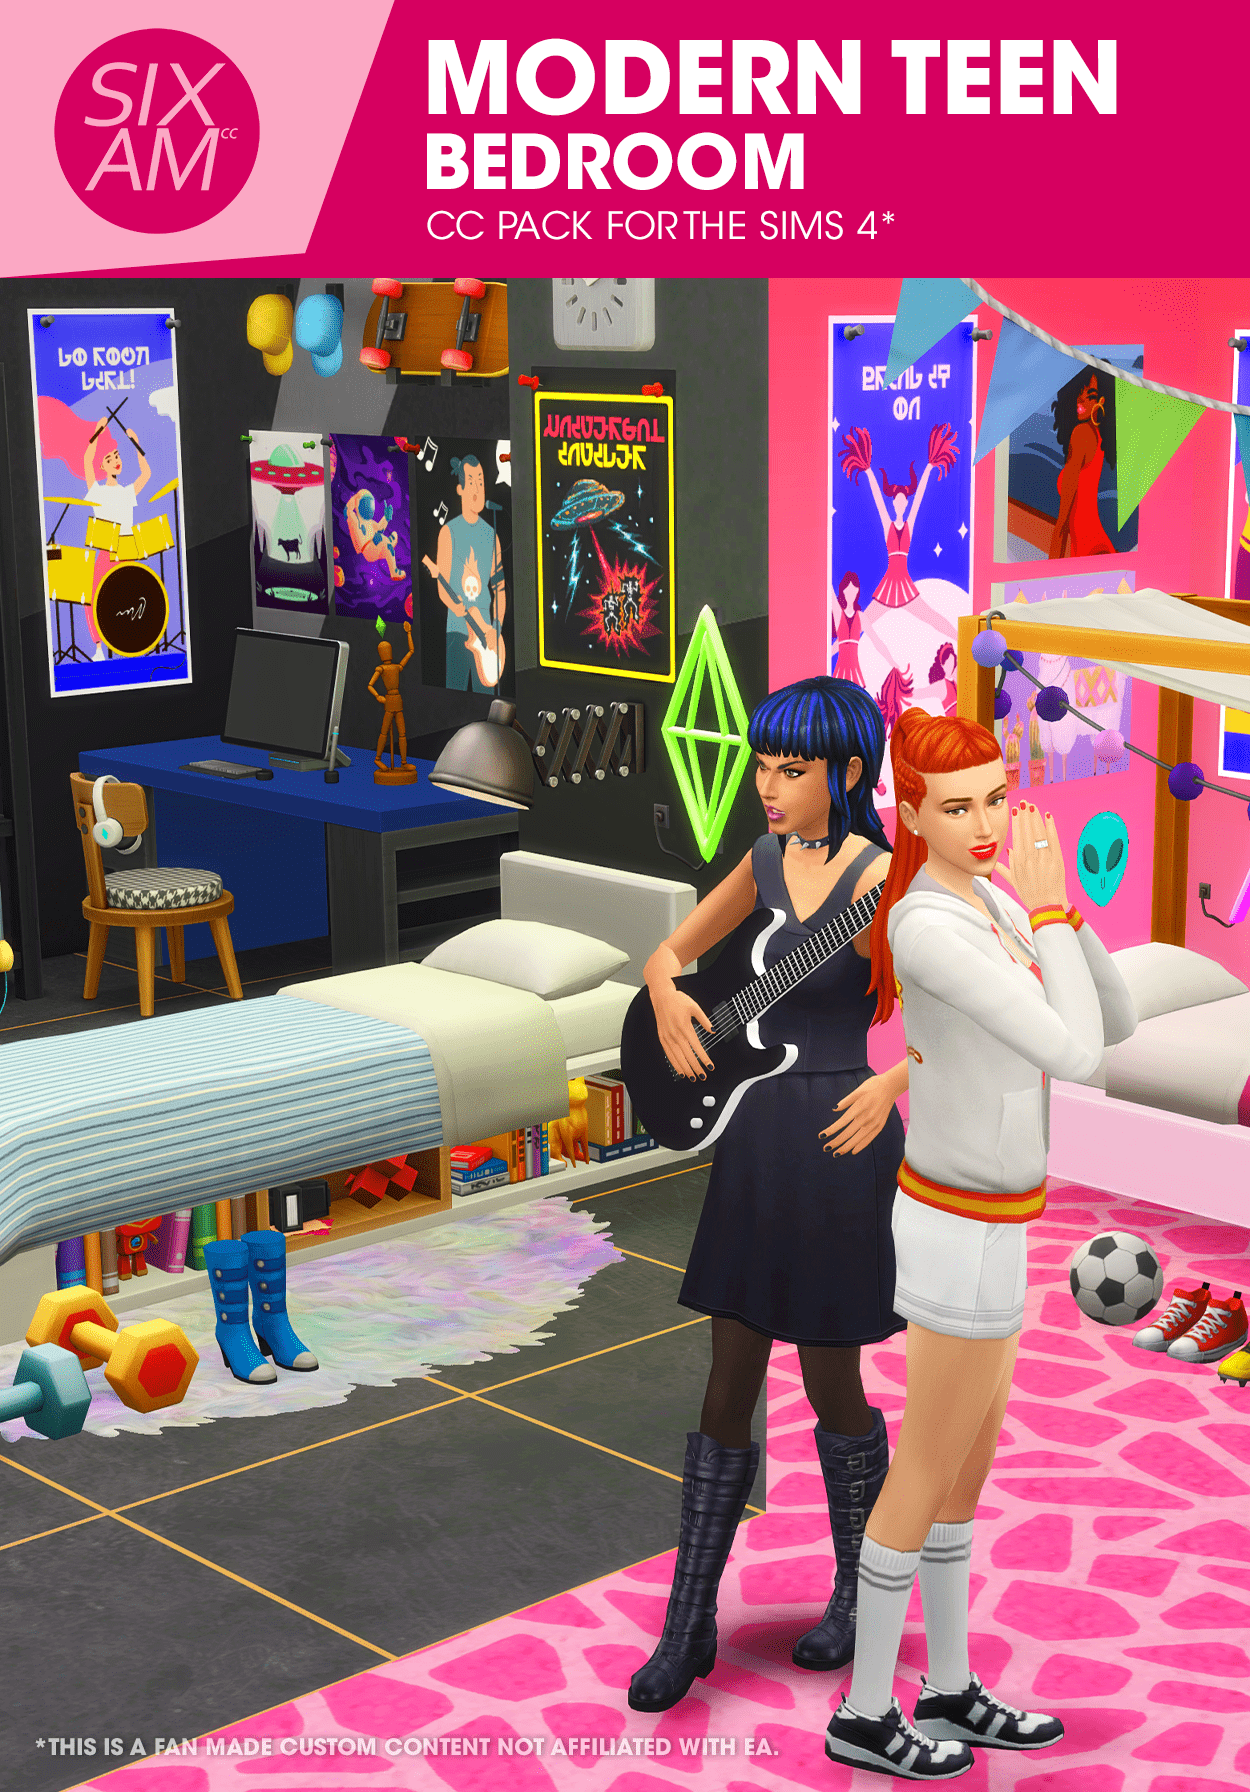 Modern Teen Bedroom (CC Pack for The Sims 4)